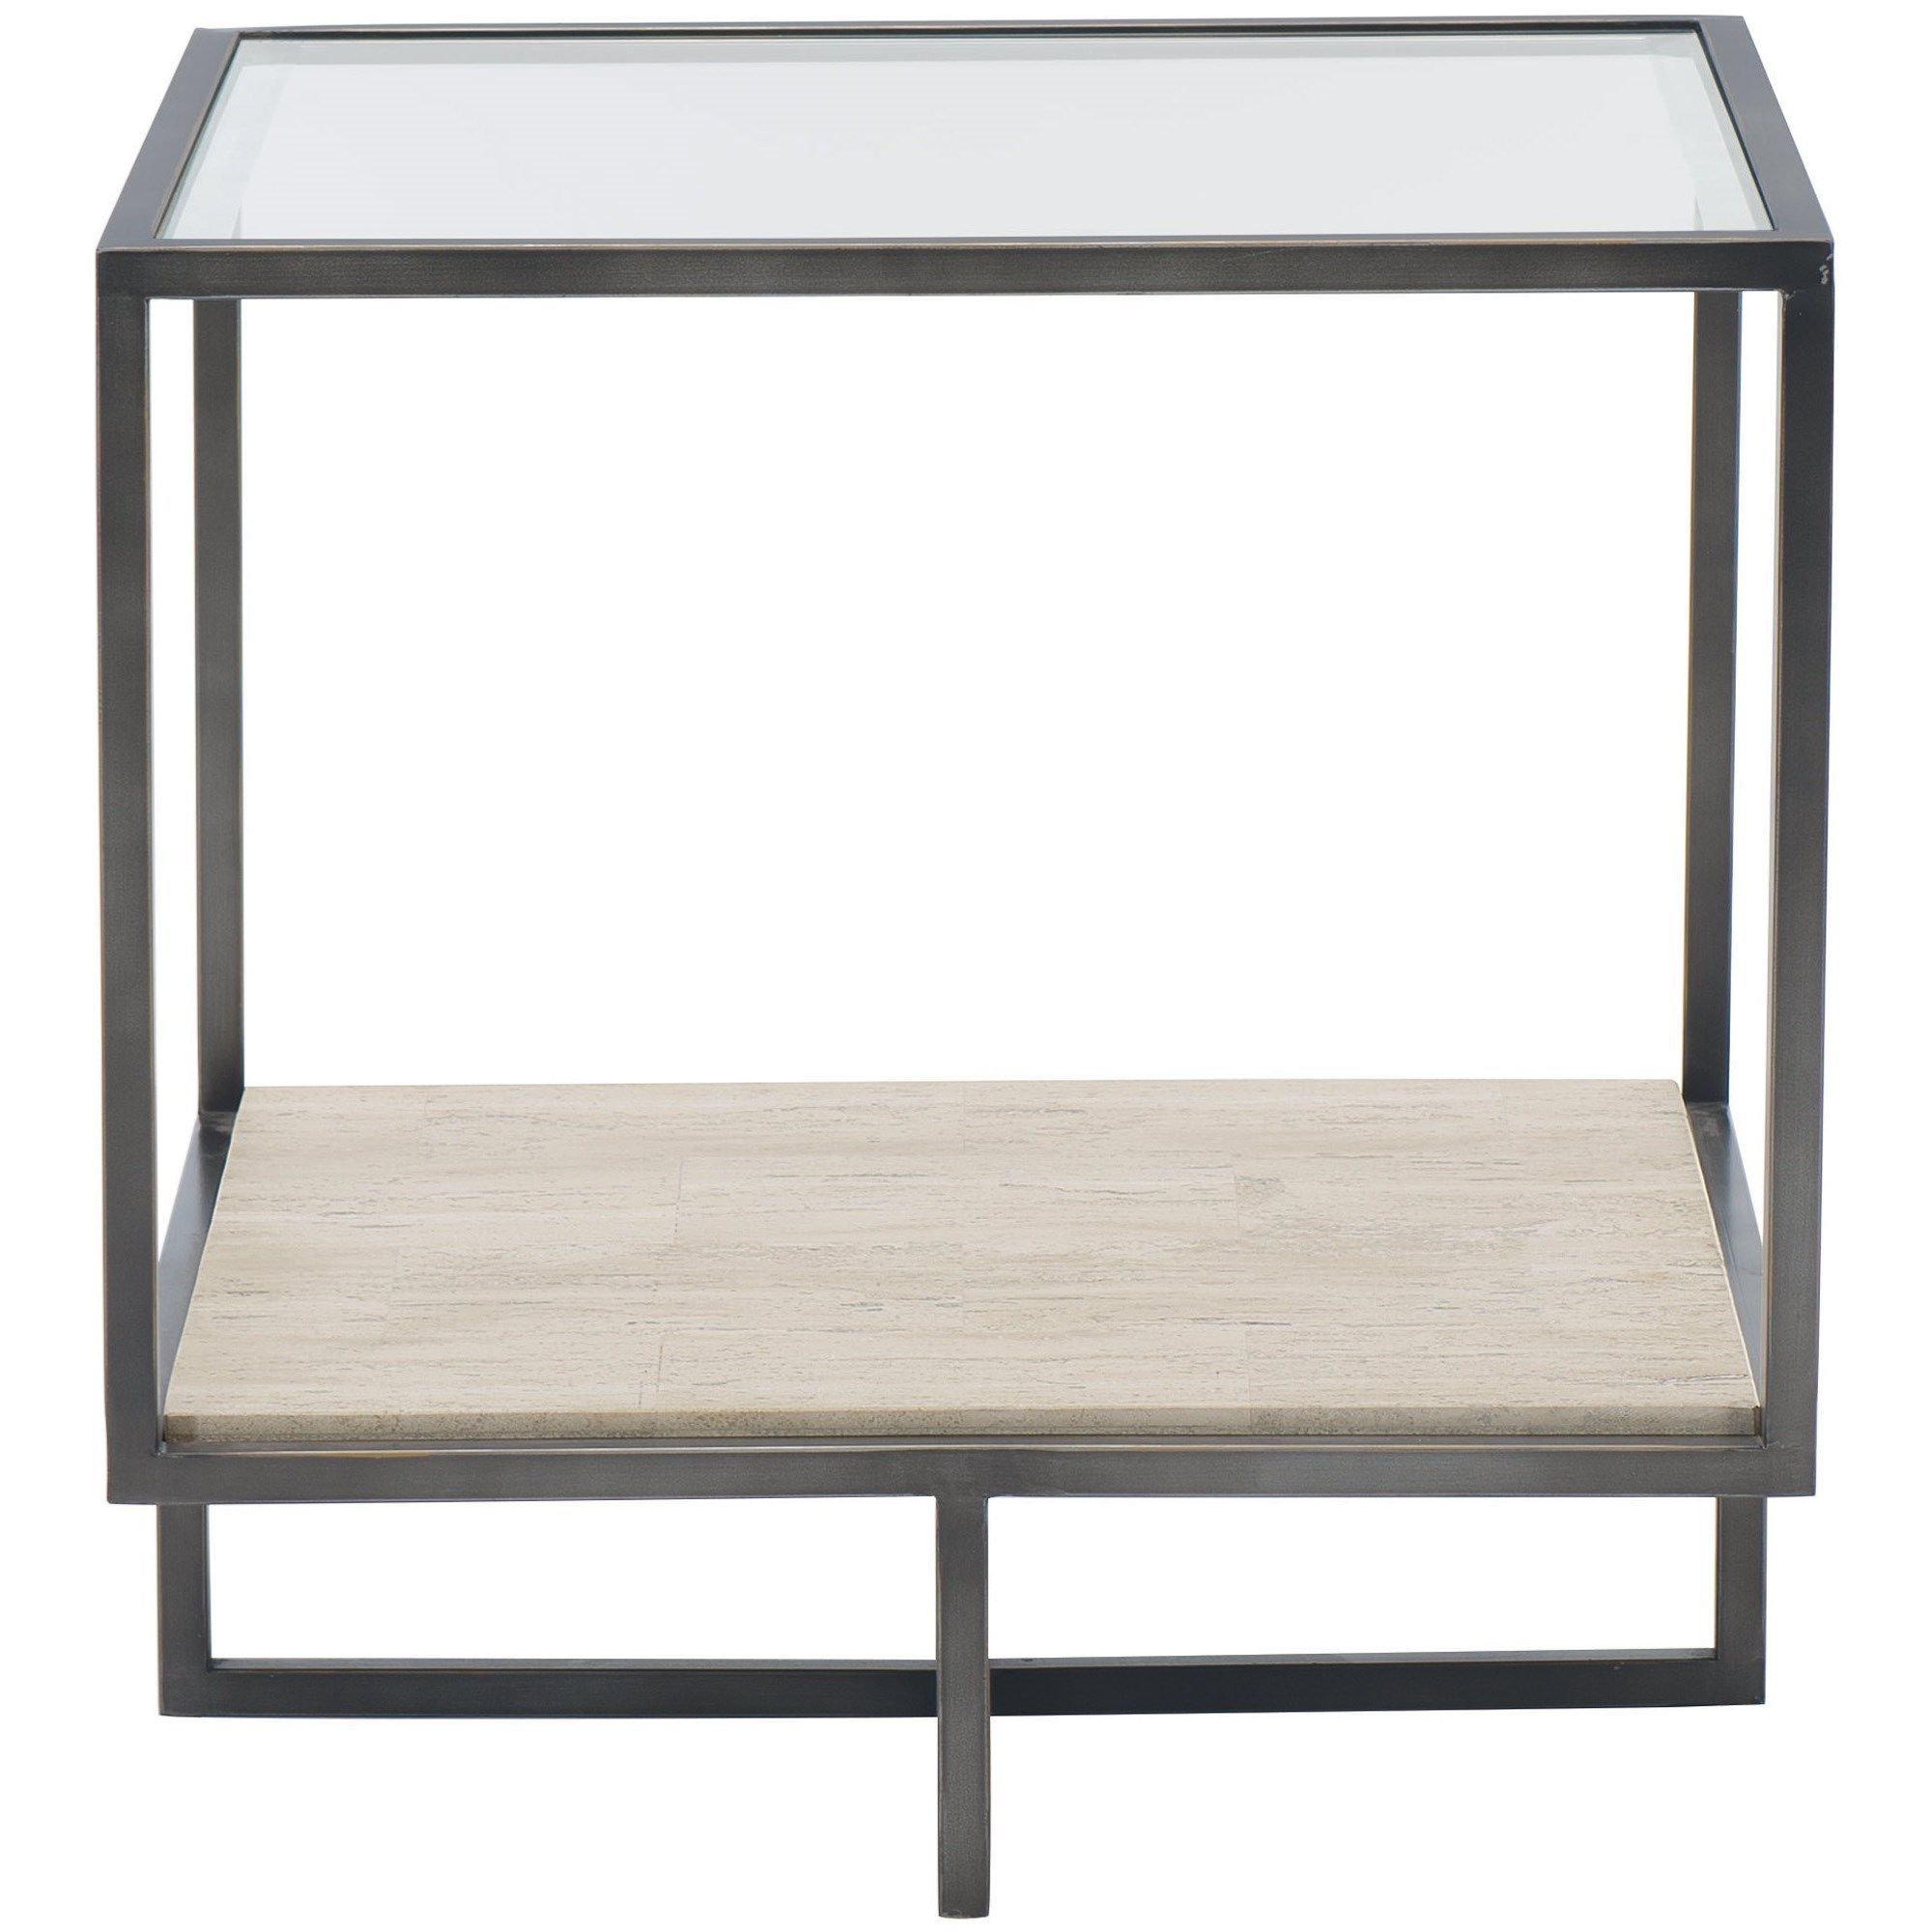 Square Console Tables Regarding Most Popular Bernhardt Harlow 514 121 Contemporary Metal Square End (View 10 of 10)